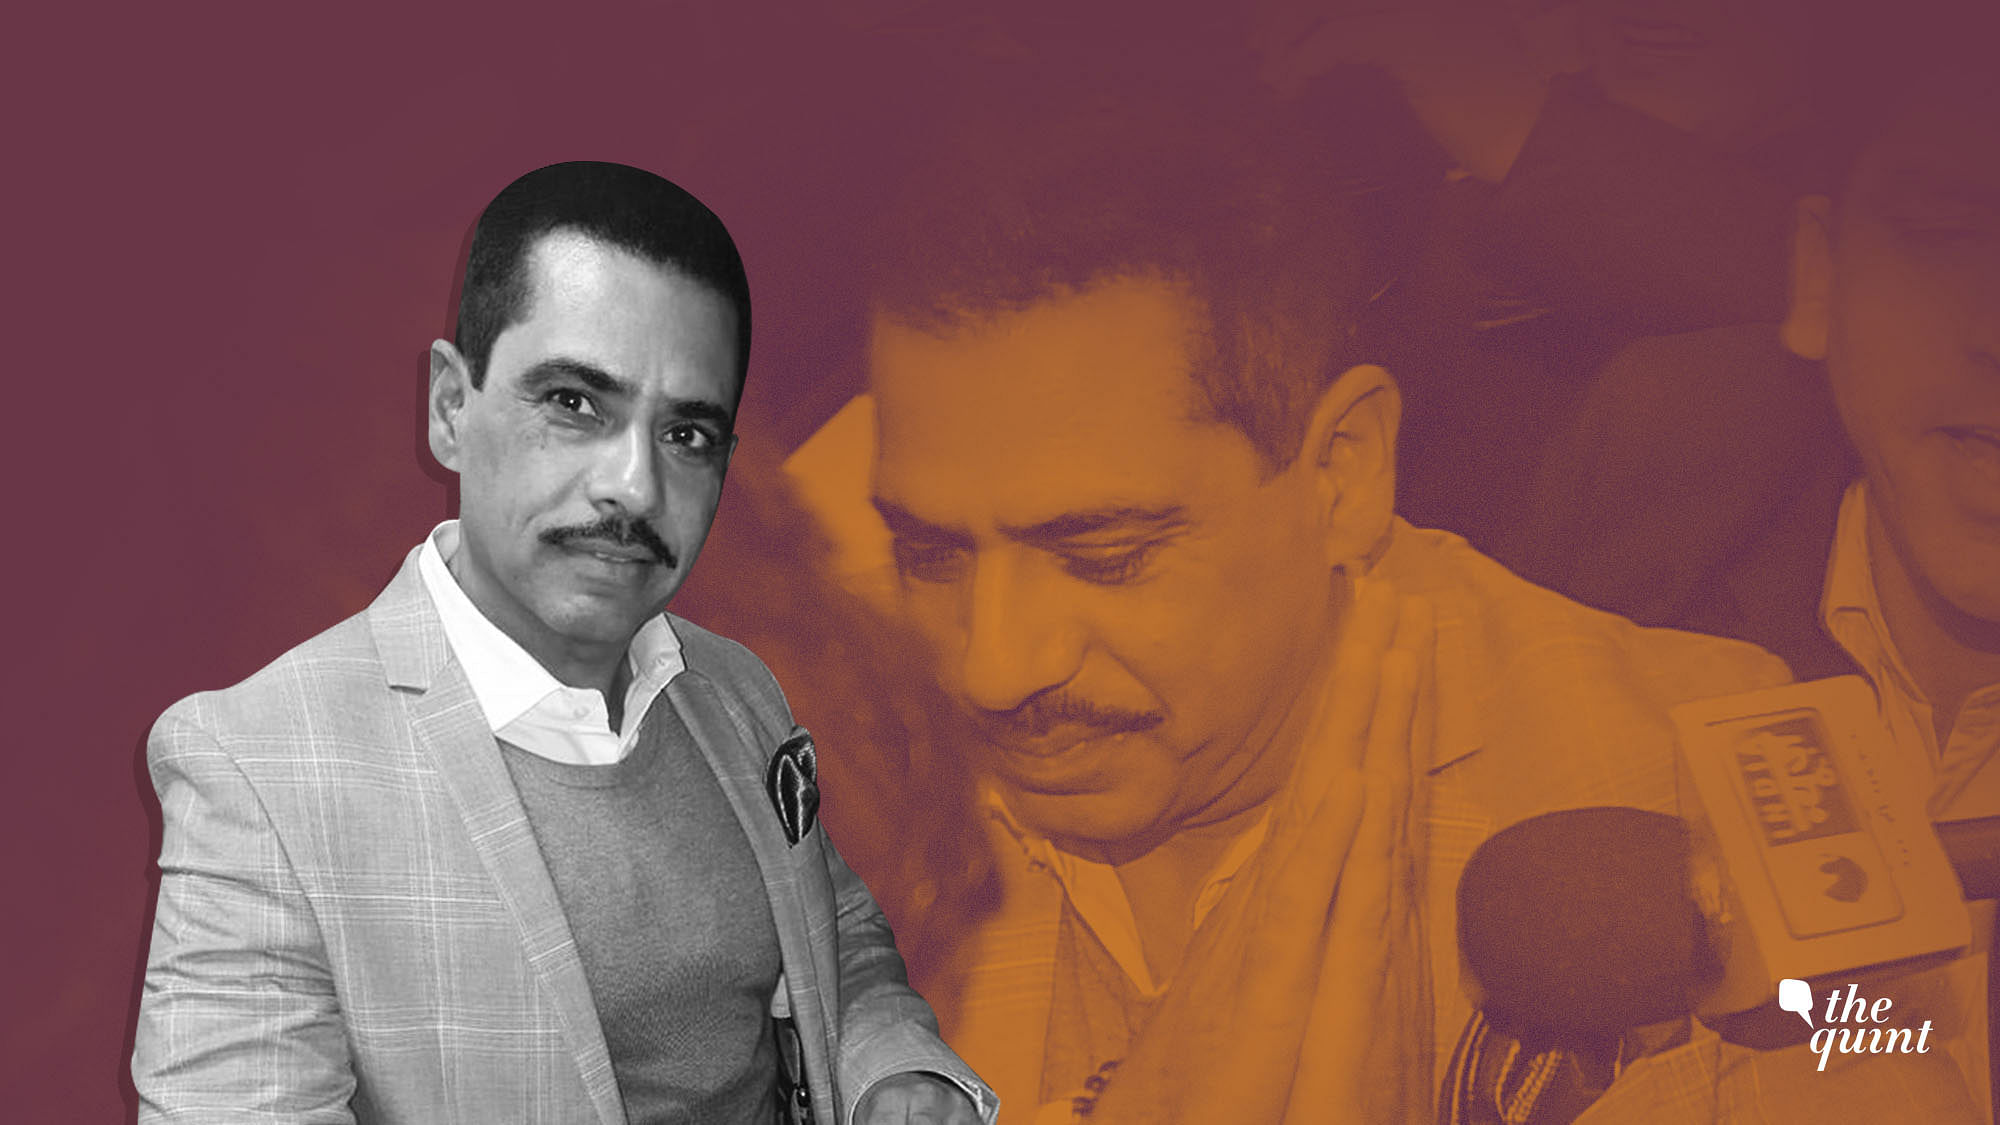 Vadra is facing allegations of money laundering.